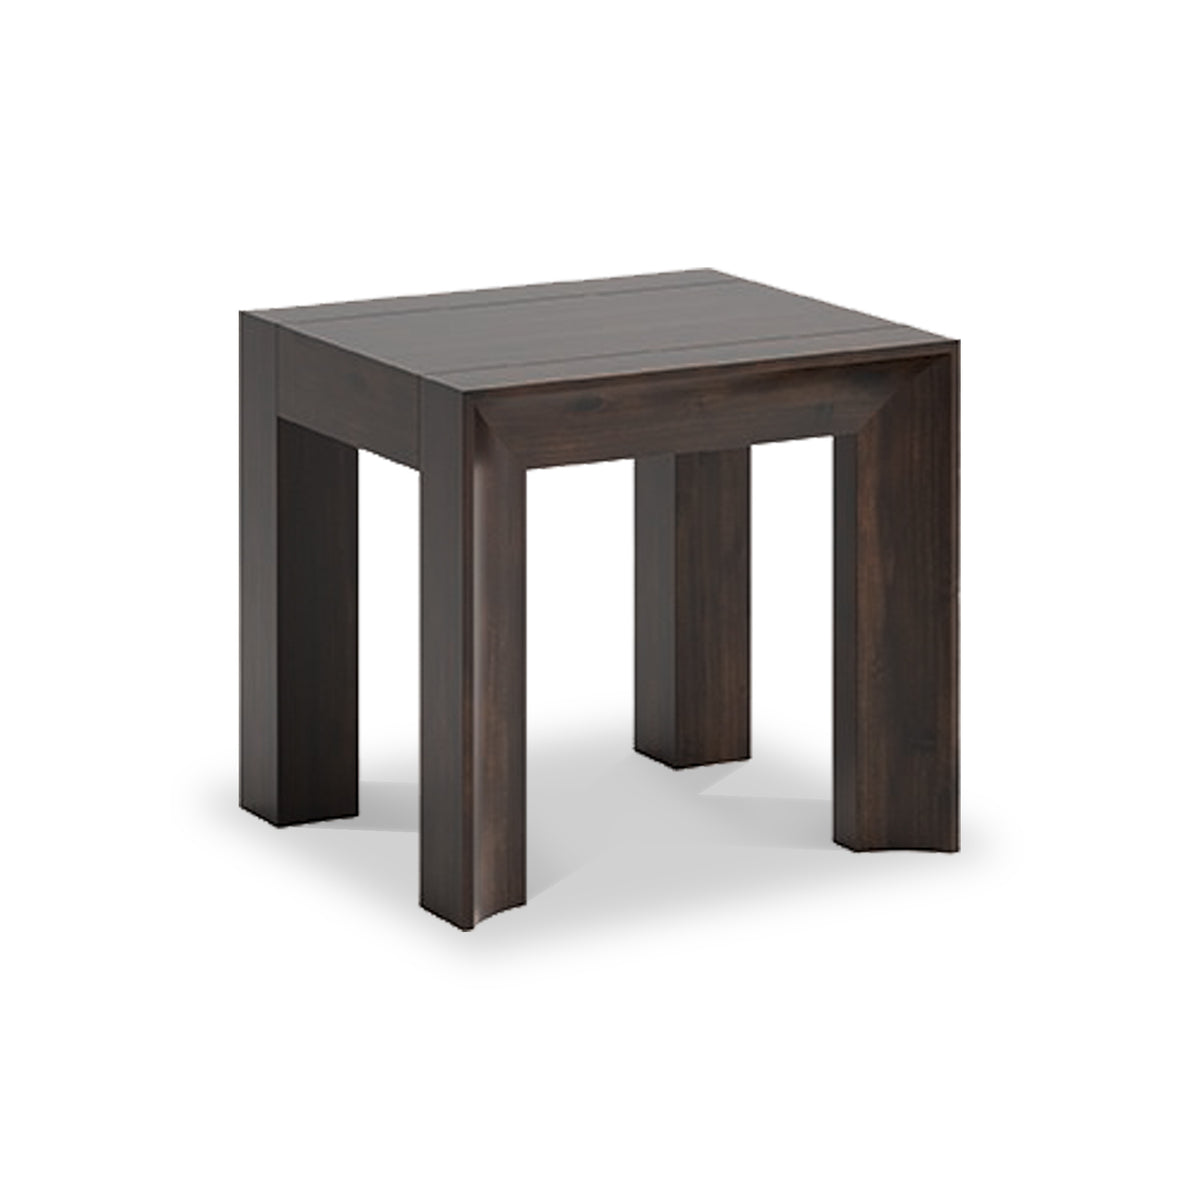 Elton Square Side Table from Roseland Furniture